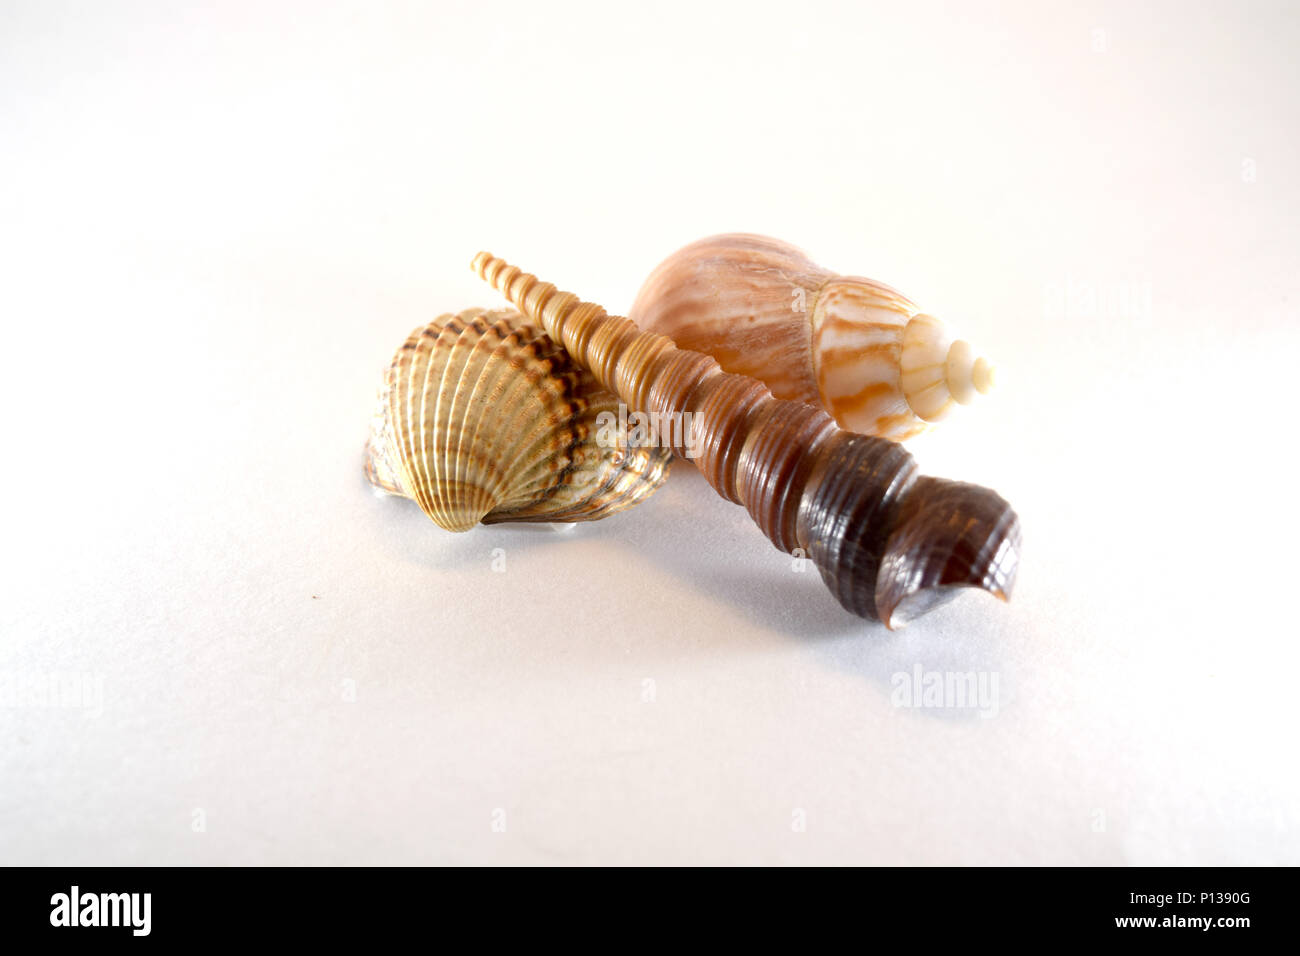 Three shells: boring turret snail, cockle, Florida rock - isolated Stock Photo